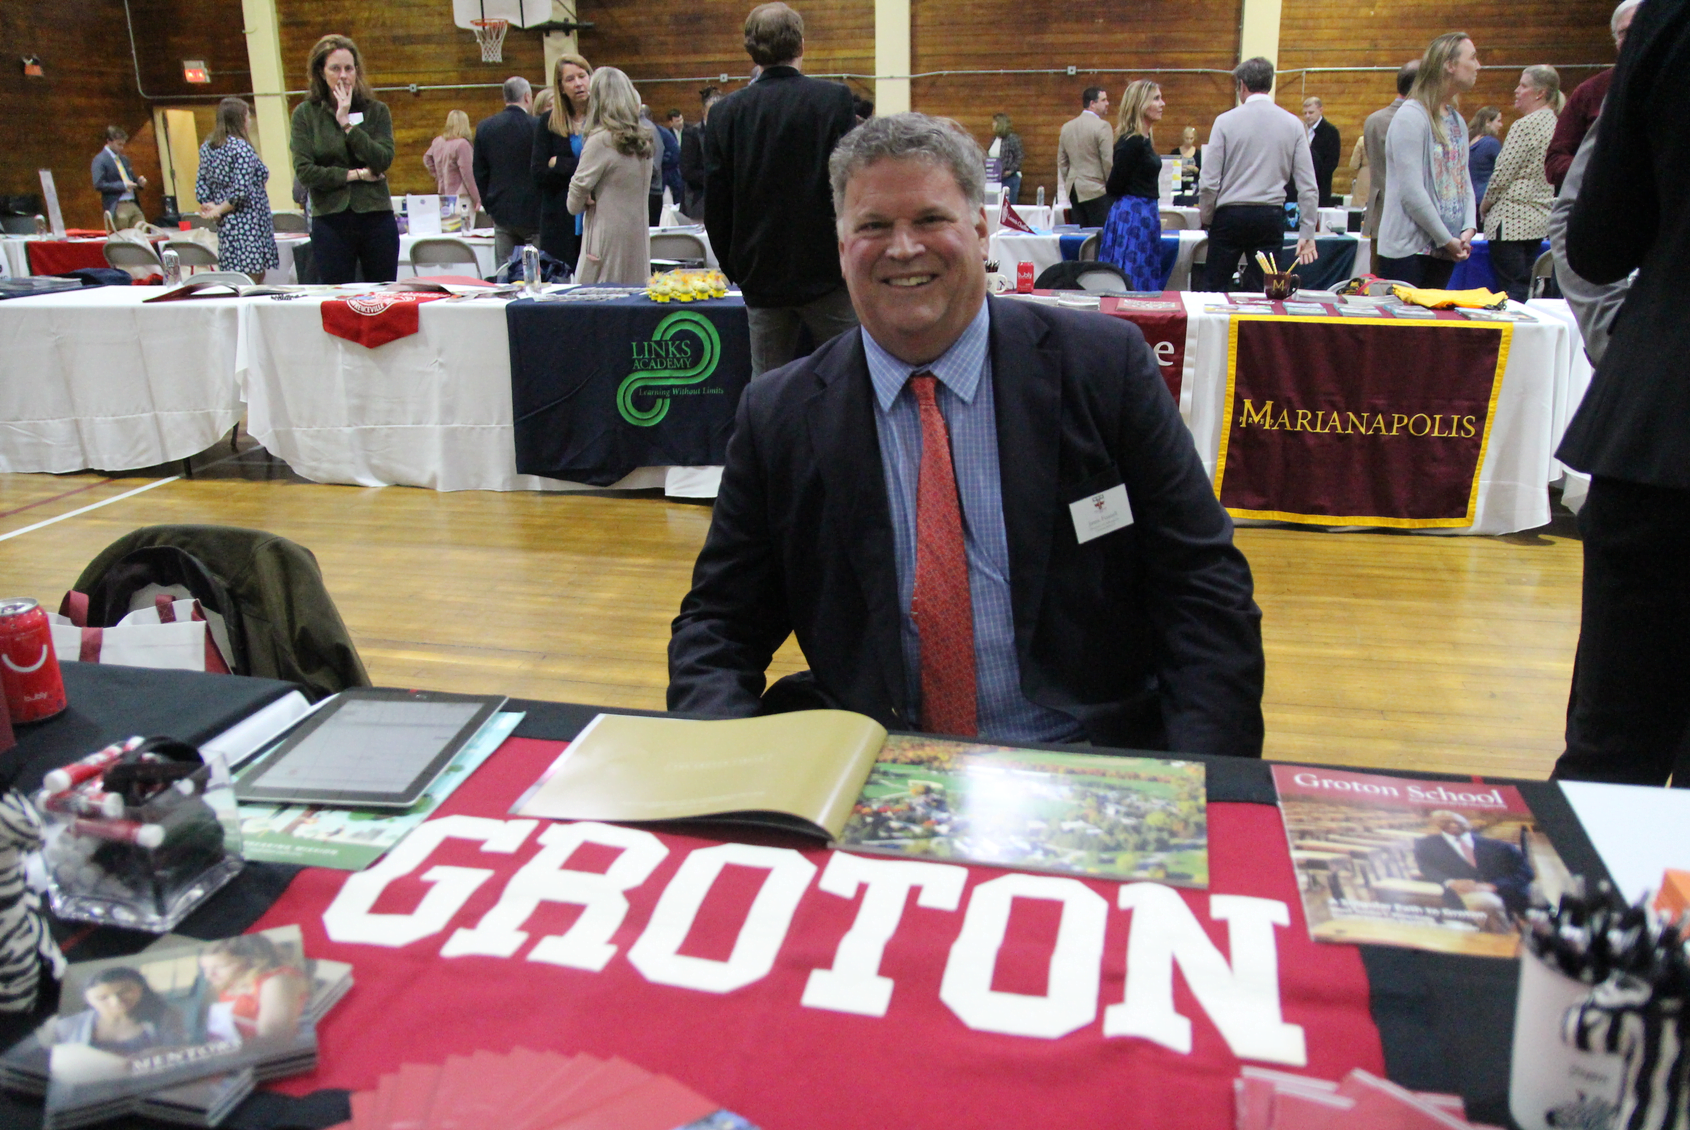 Director of Admission James Funnell from Groton School in Groton, MA. May 14, 2019 Photo: Leslie Yager